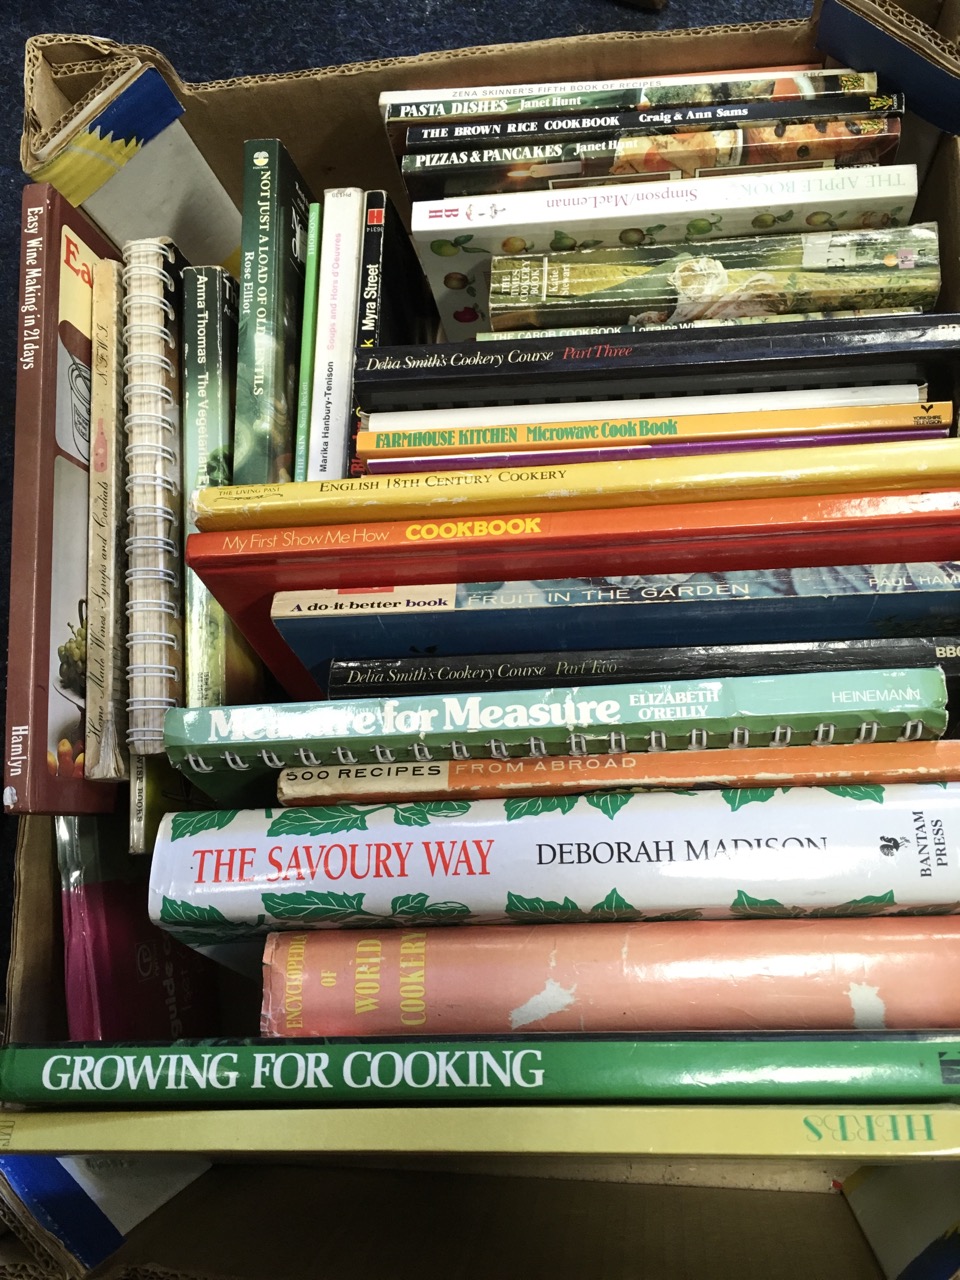 A quantity of cookery books - Delia, paperbacks, recipes, vegetarian, preserving, wine, etc. (72) - Image 4 of 6